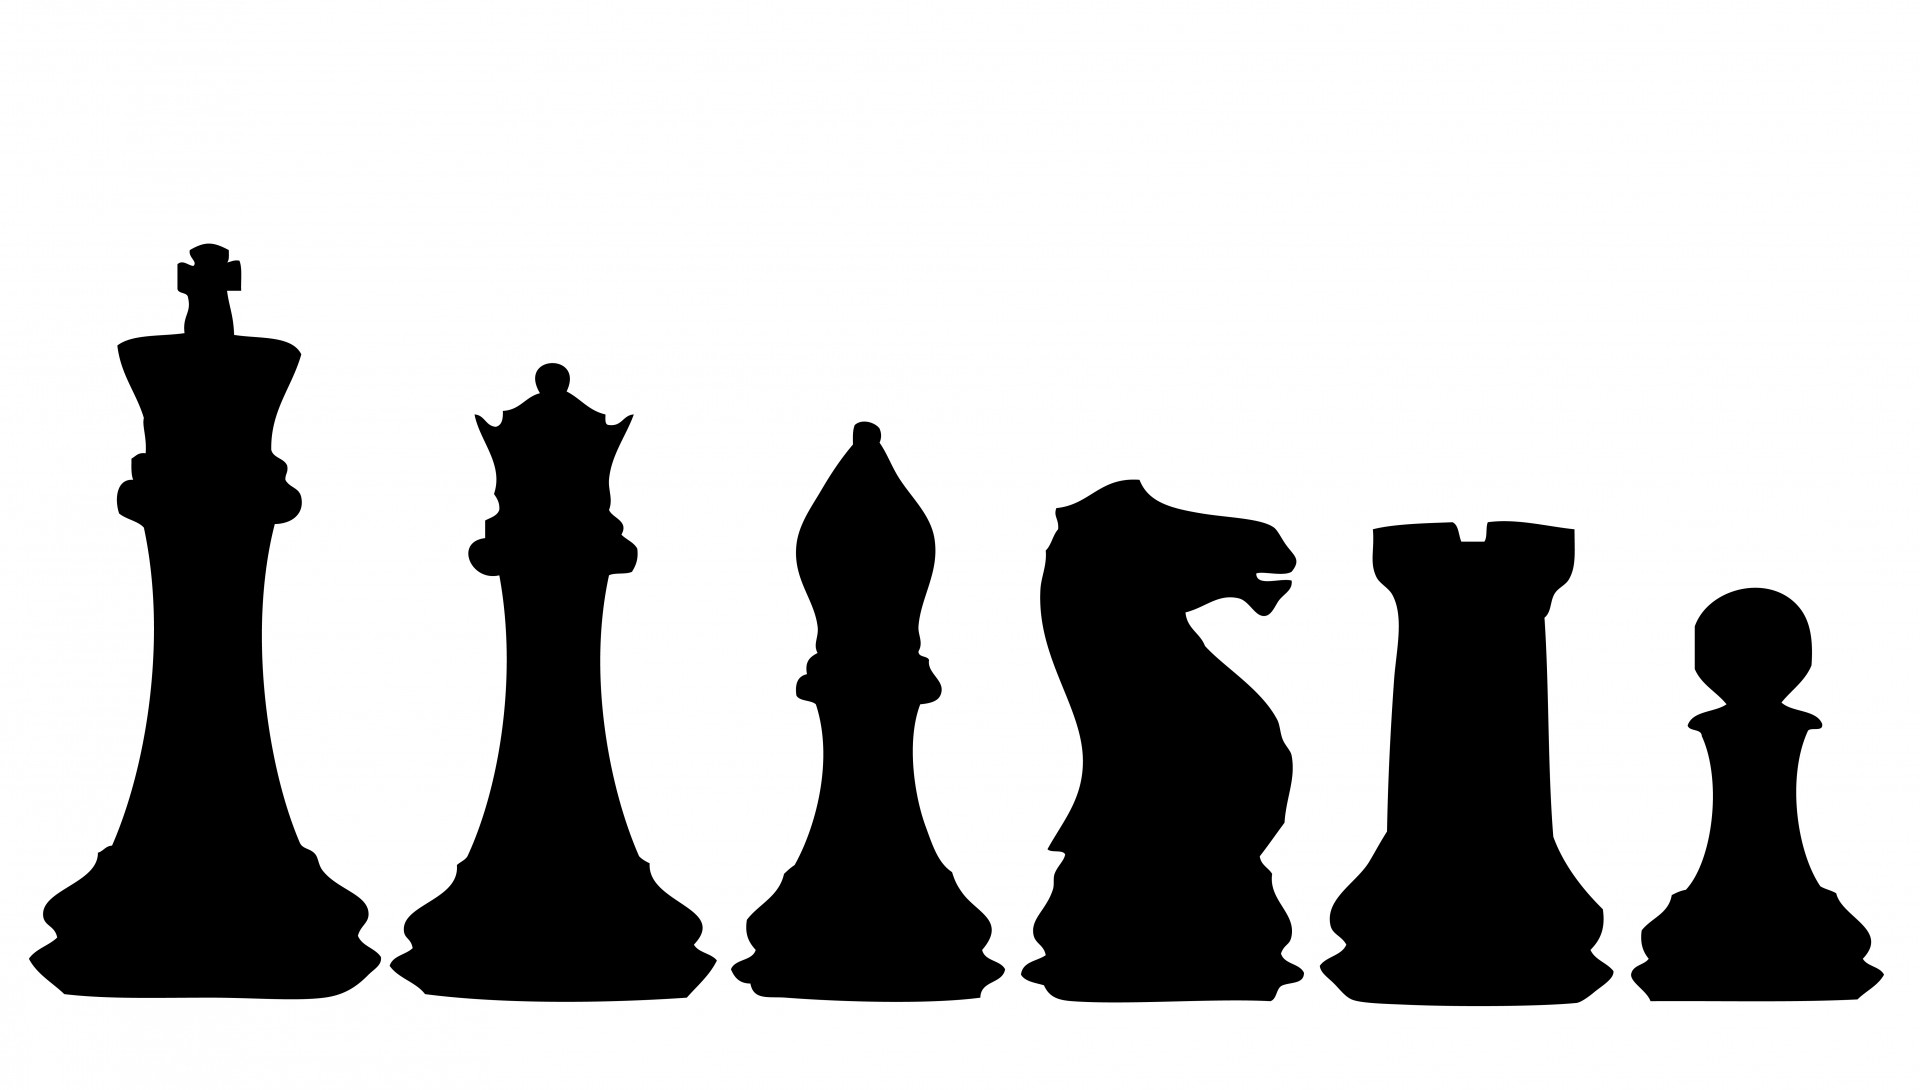 Chess Pieces Clipart - Chess Pieces Clip Art